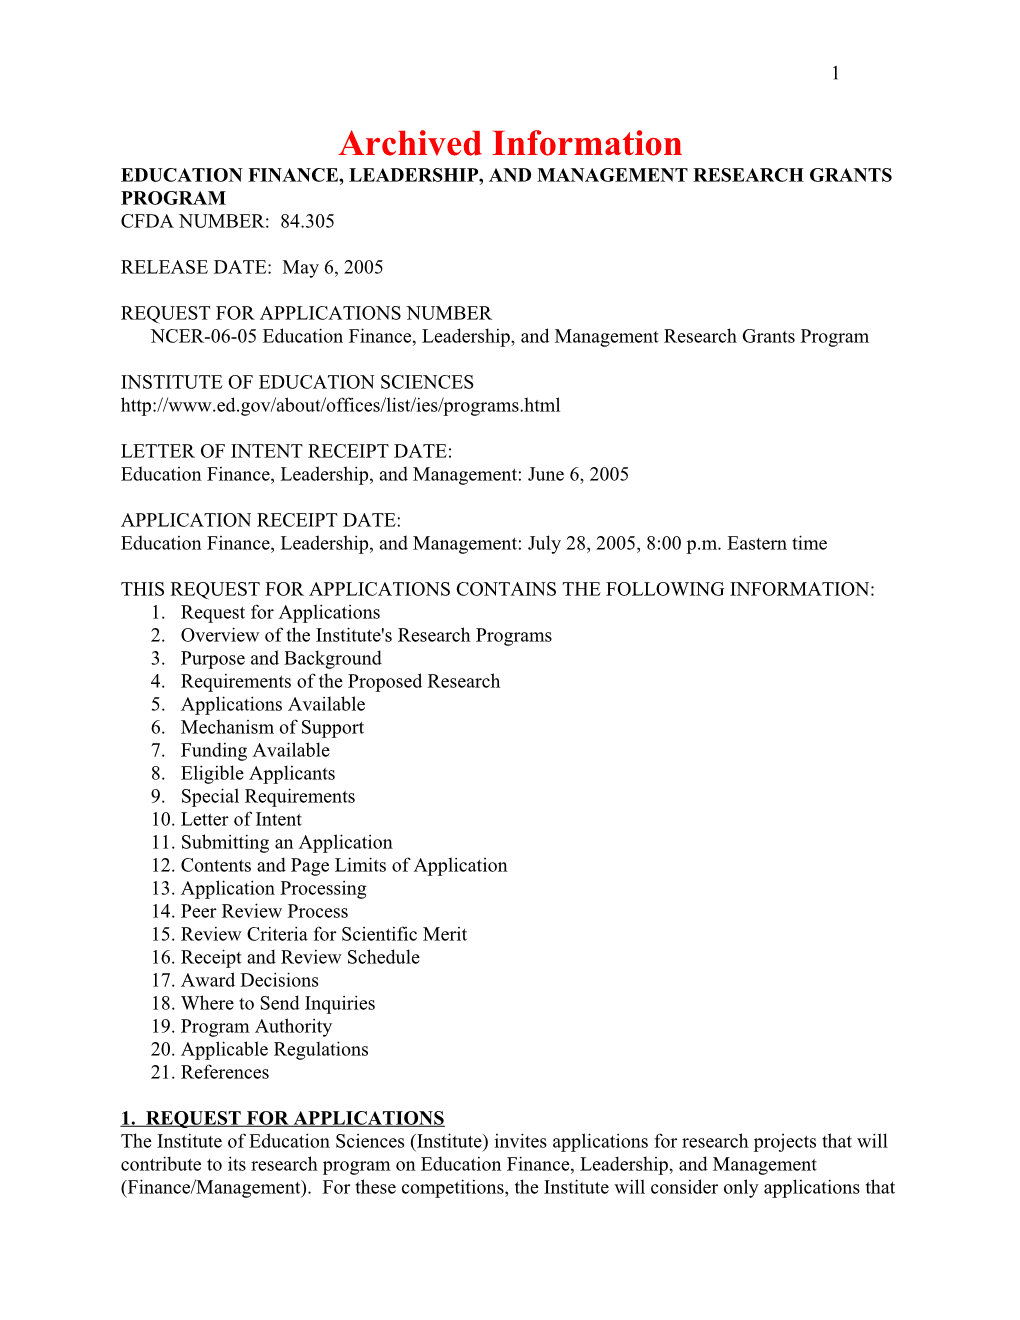 Archived: Education Finance, Leadership, and Management Research Grants Program 84.305E